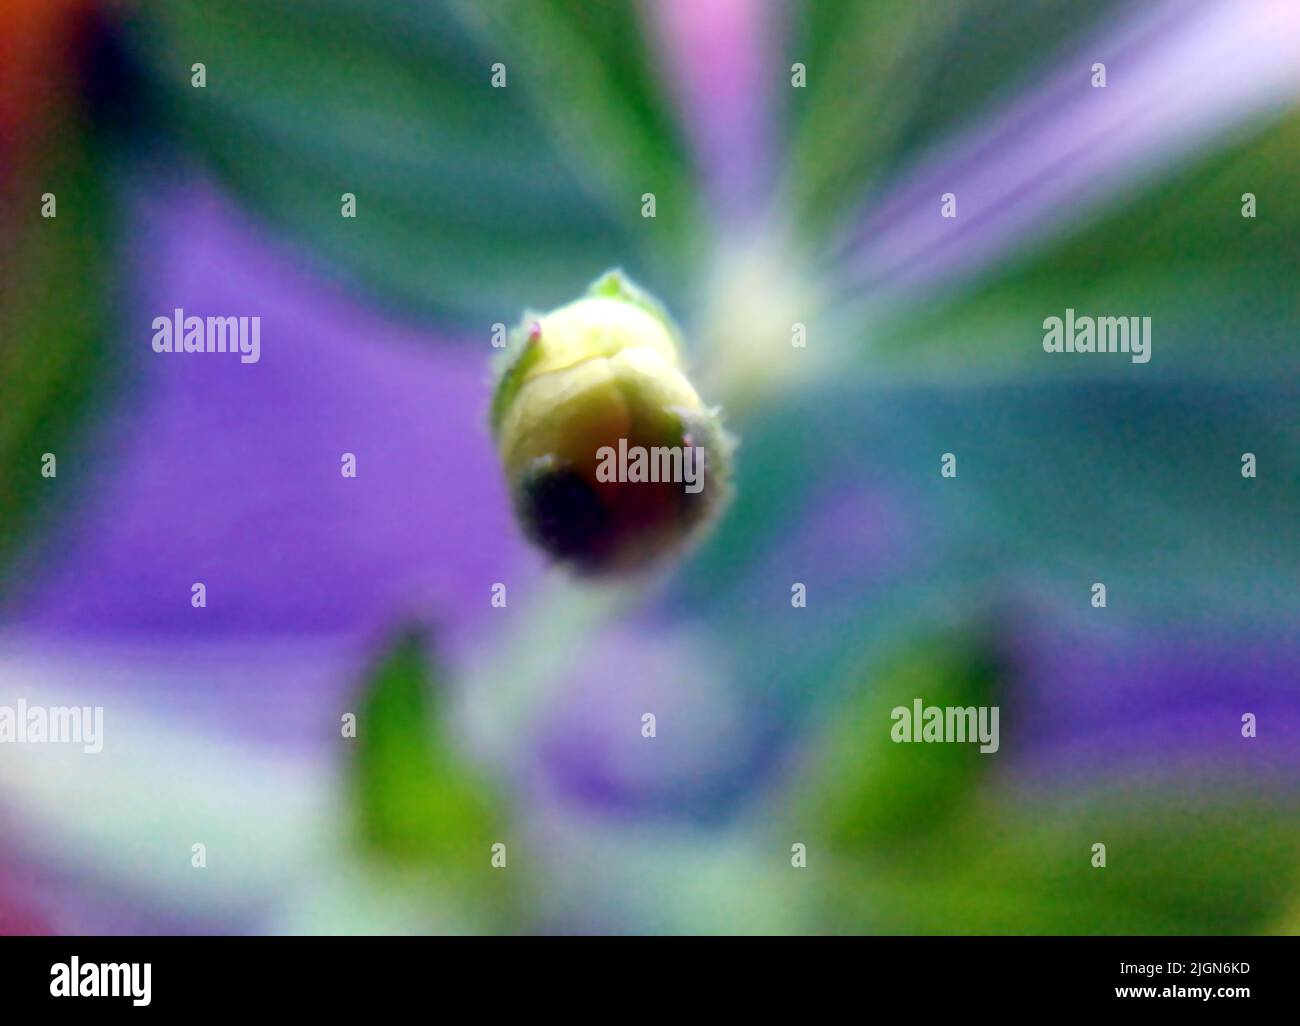 flower buds and closed flower in moody macro photo Stock Photo